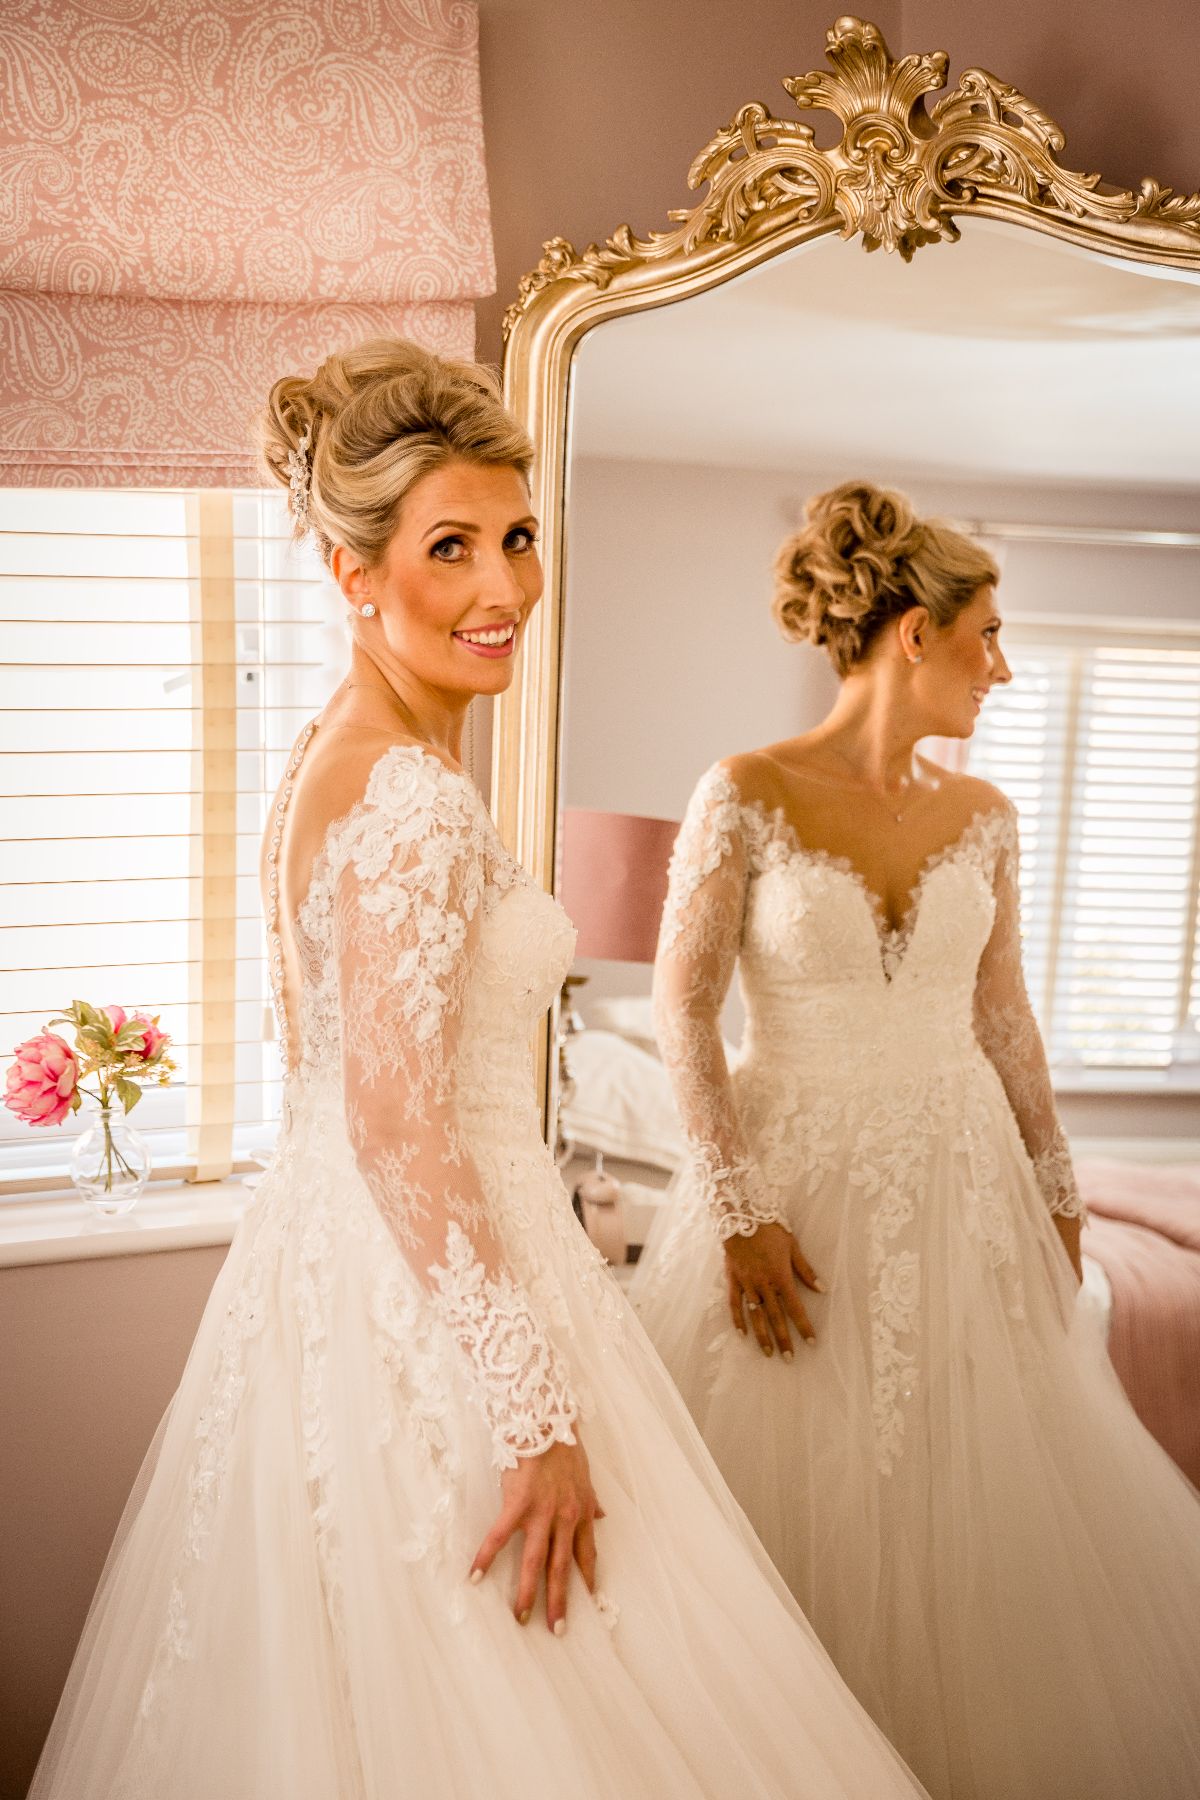 The GORGEOUS Bride stands for a picture after preparations...